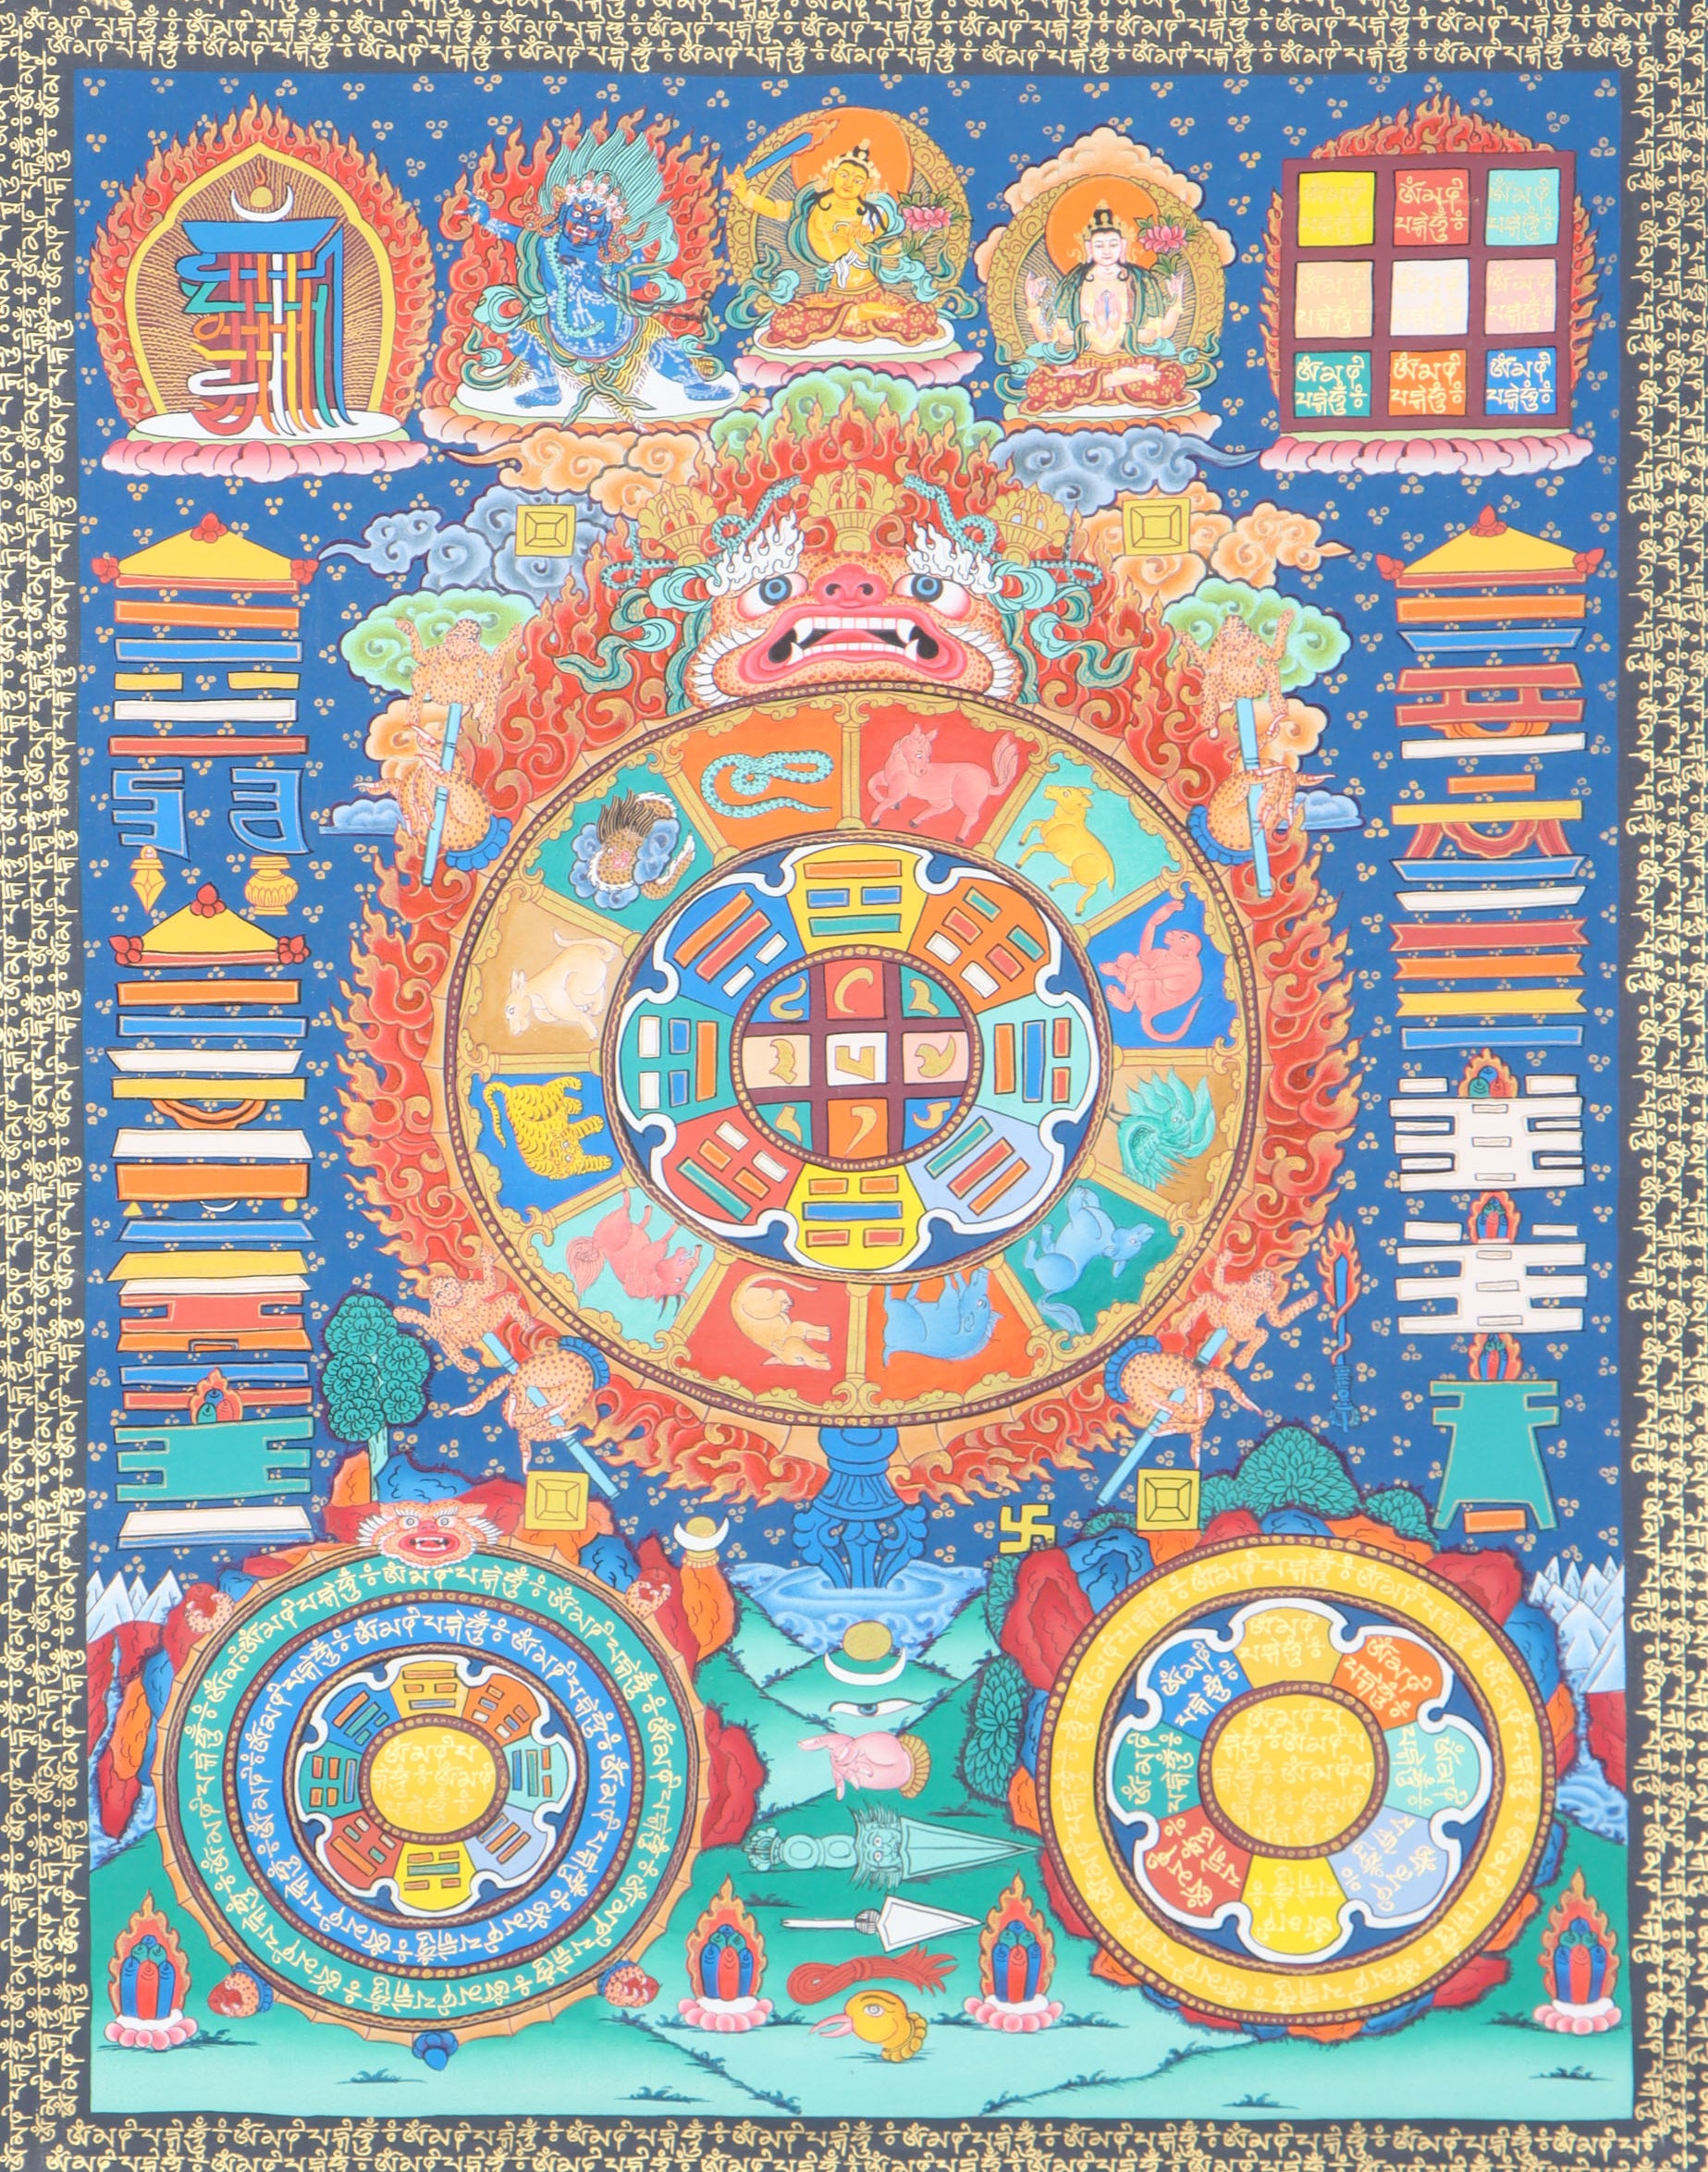 Tibetan Horoscope Calender Thangka helps to track time while giving a spiritual focus and reminder of Buddhist teachings.